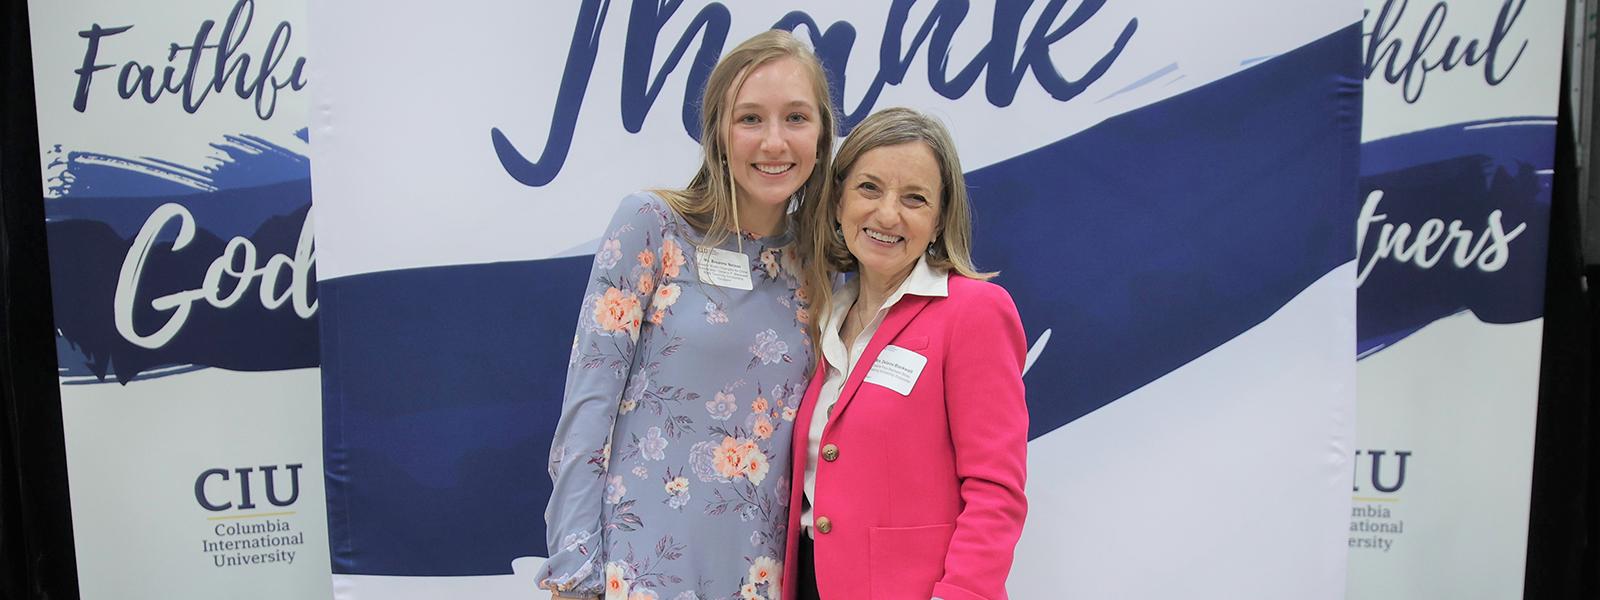 Scholarship recipient Breanne Nelson, who plans on overseas missions work after graduation, poses with scholarship donor Delaine Blackwell, a former CIU board member. (Photos by Alexis Deason, CIU student photographer)